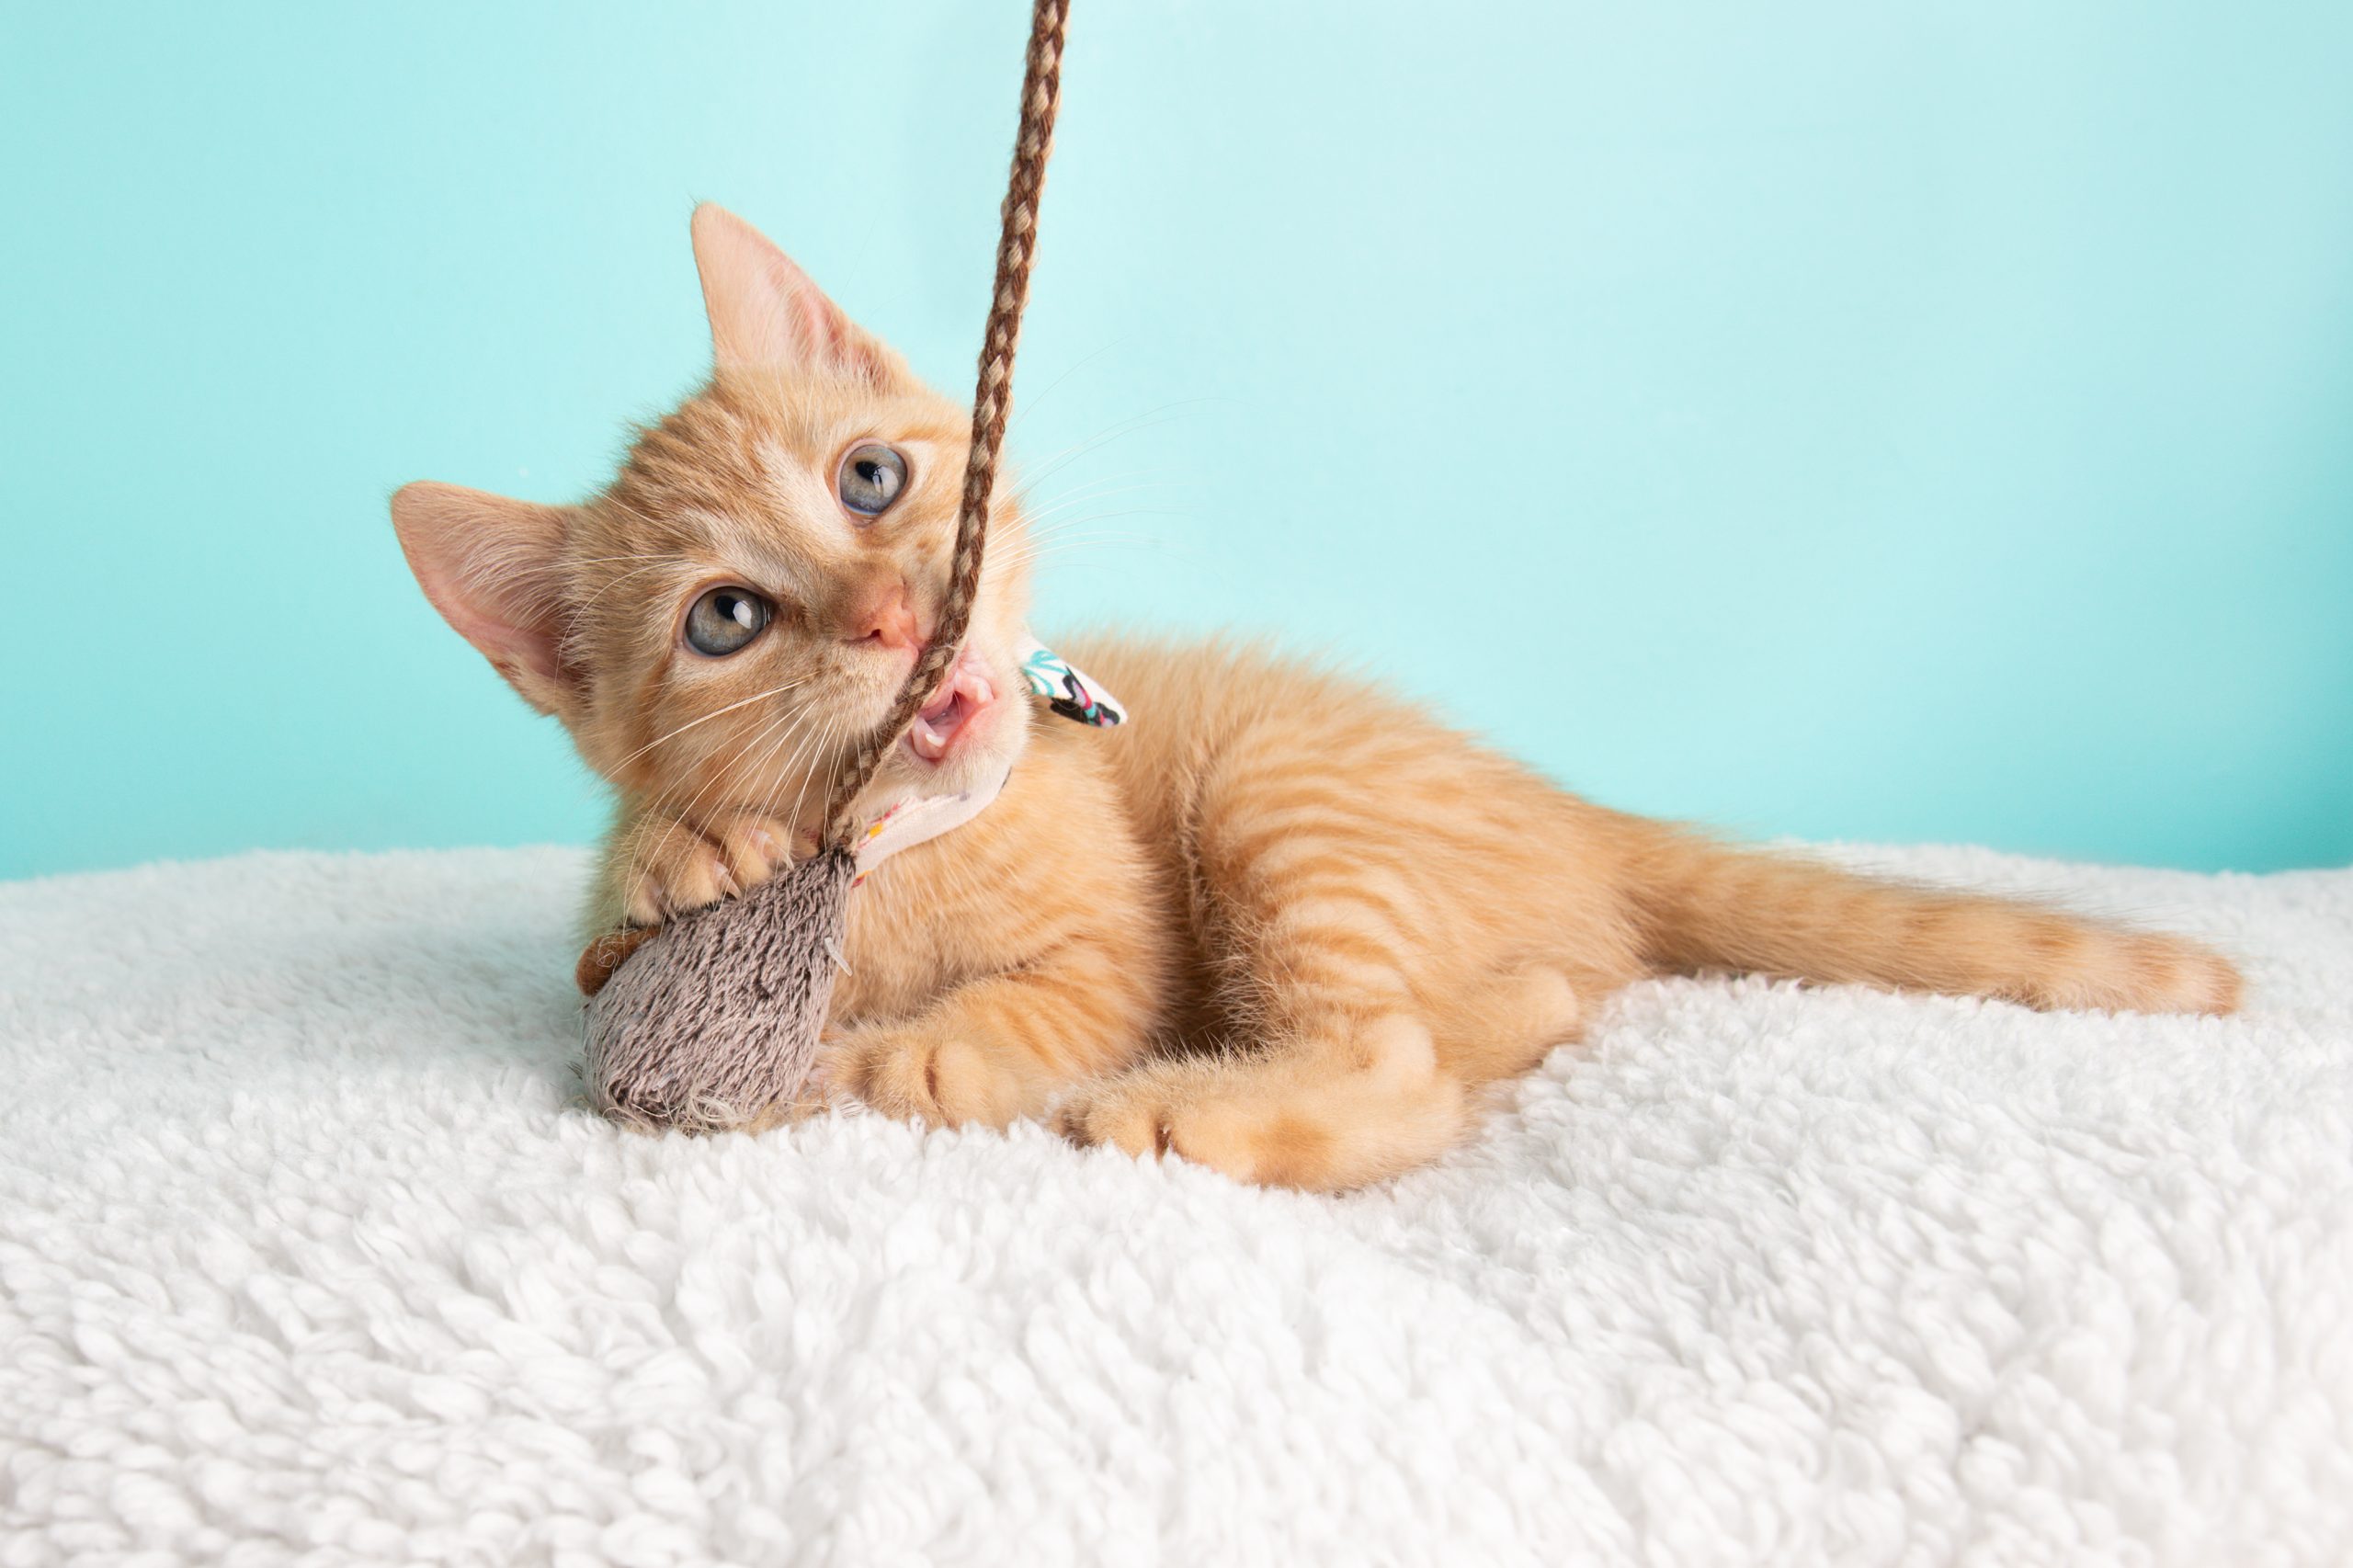 Cat biting rope toy